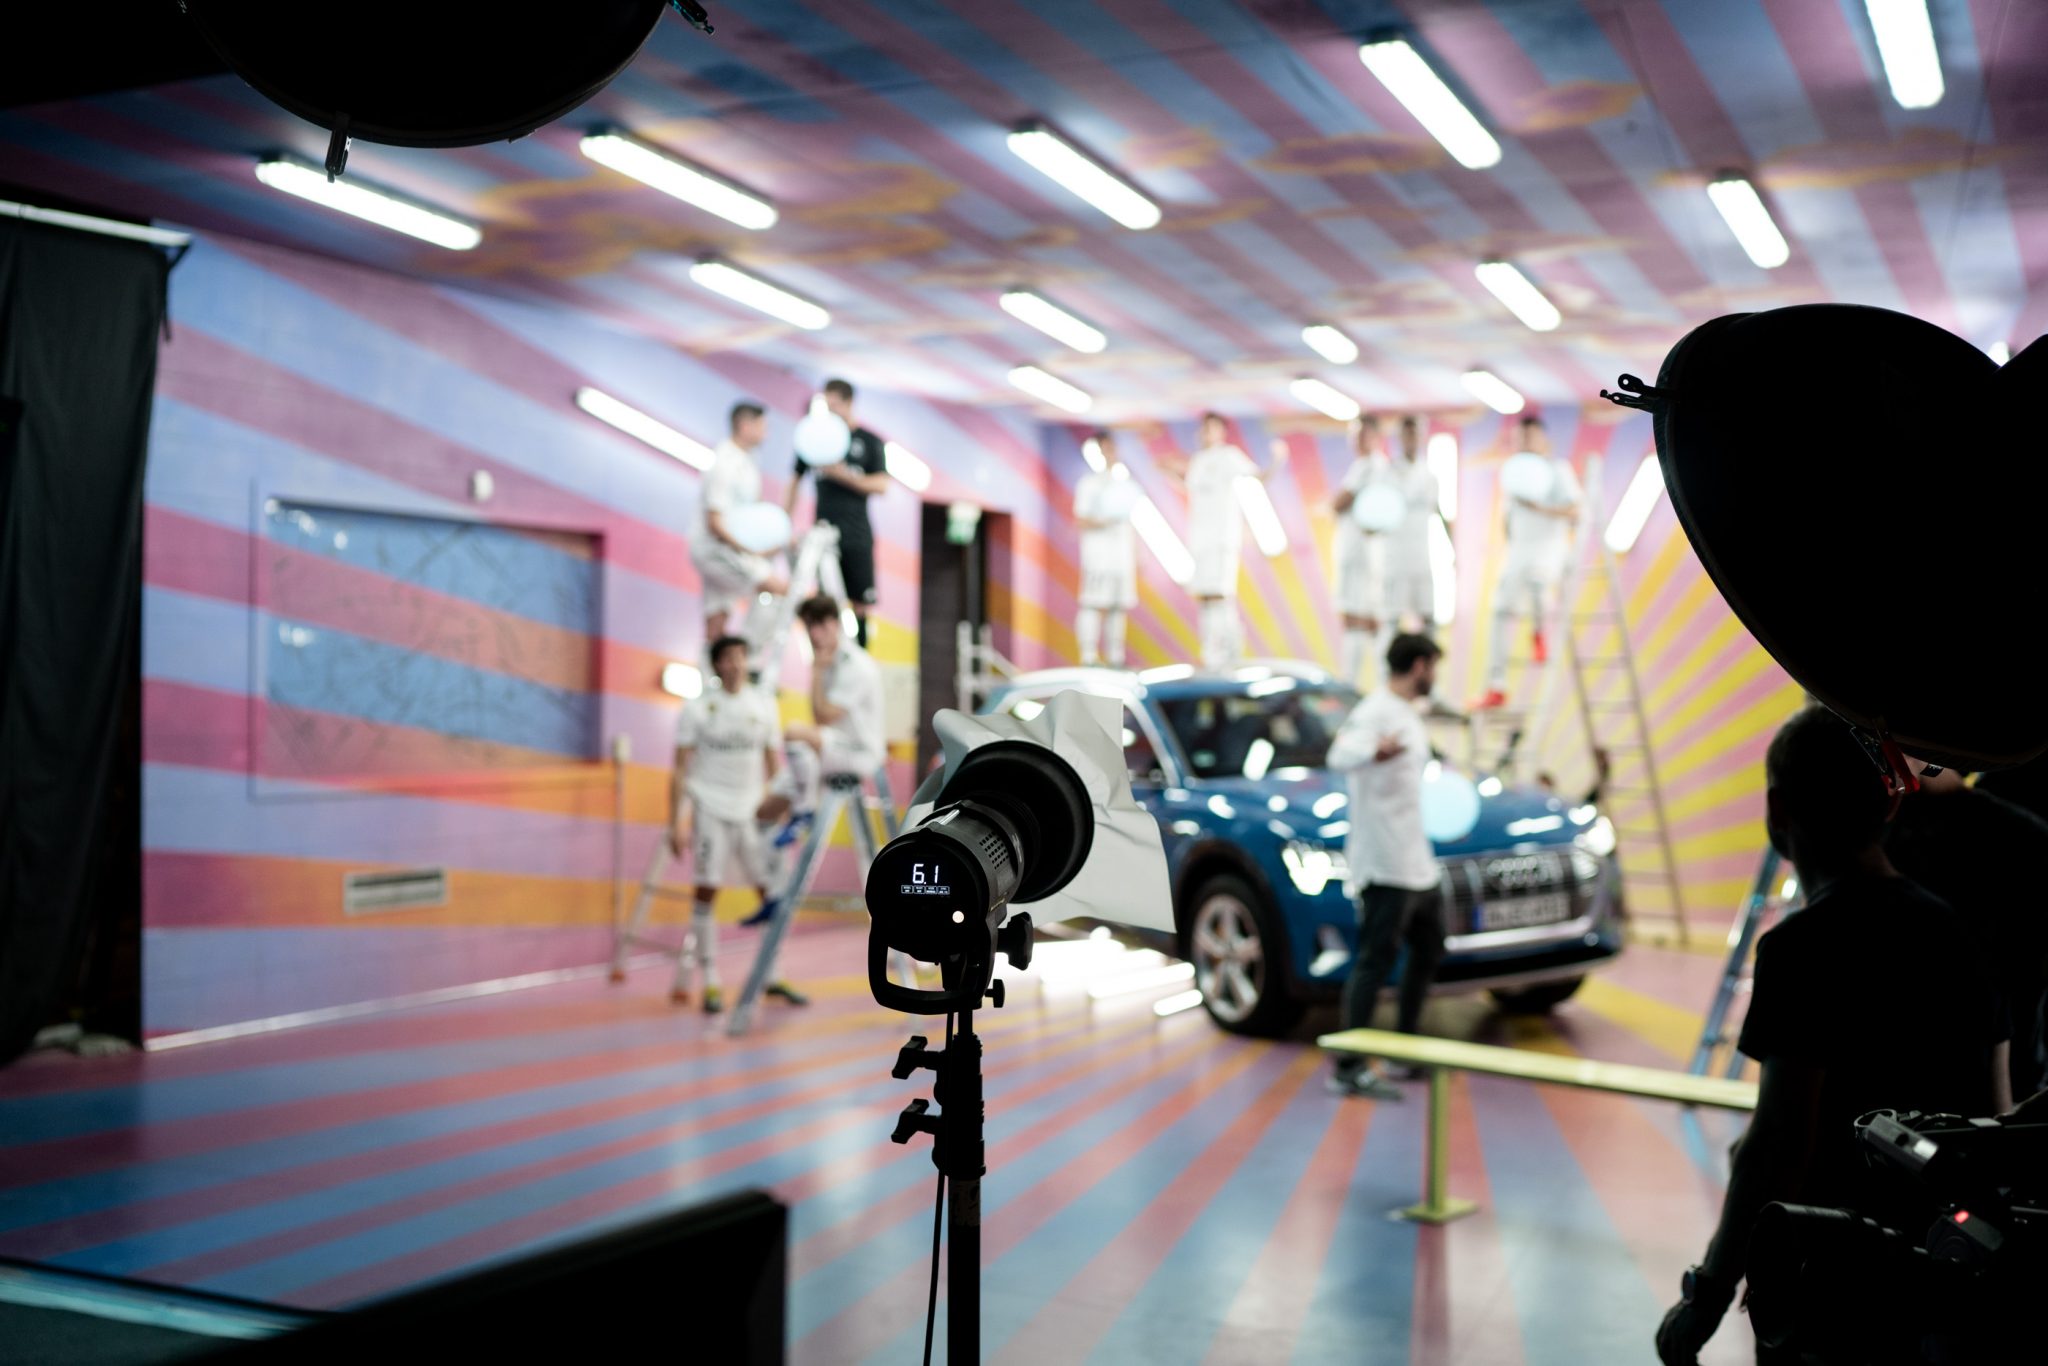 David LaChapelle | Audi x Real Madrid | Behind-the-scenes photographs from the Audi E-tron launch shoot in Madrid. | 24